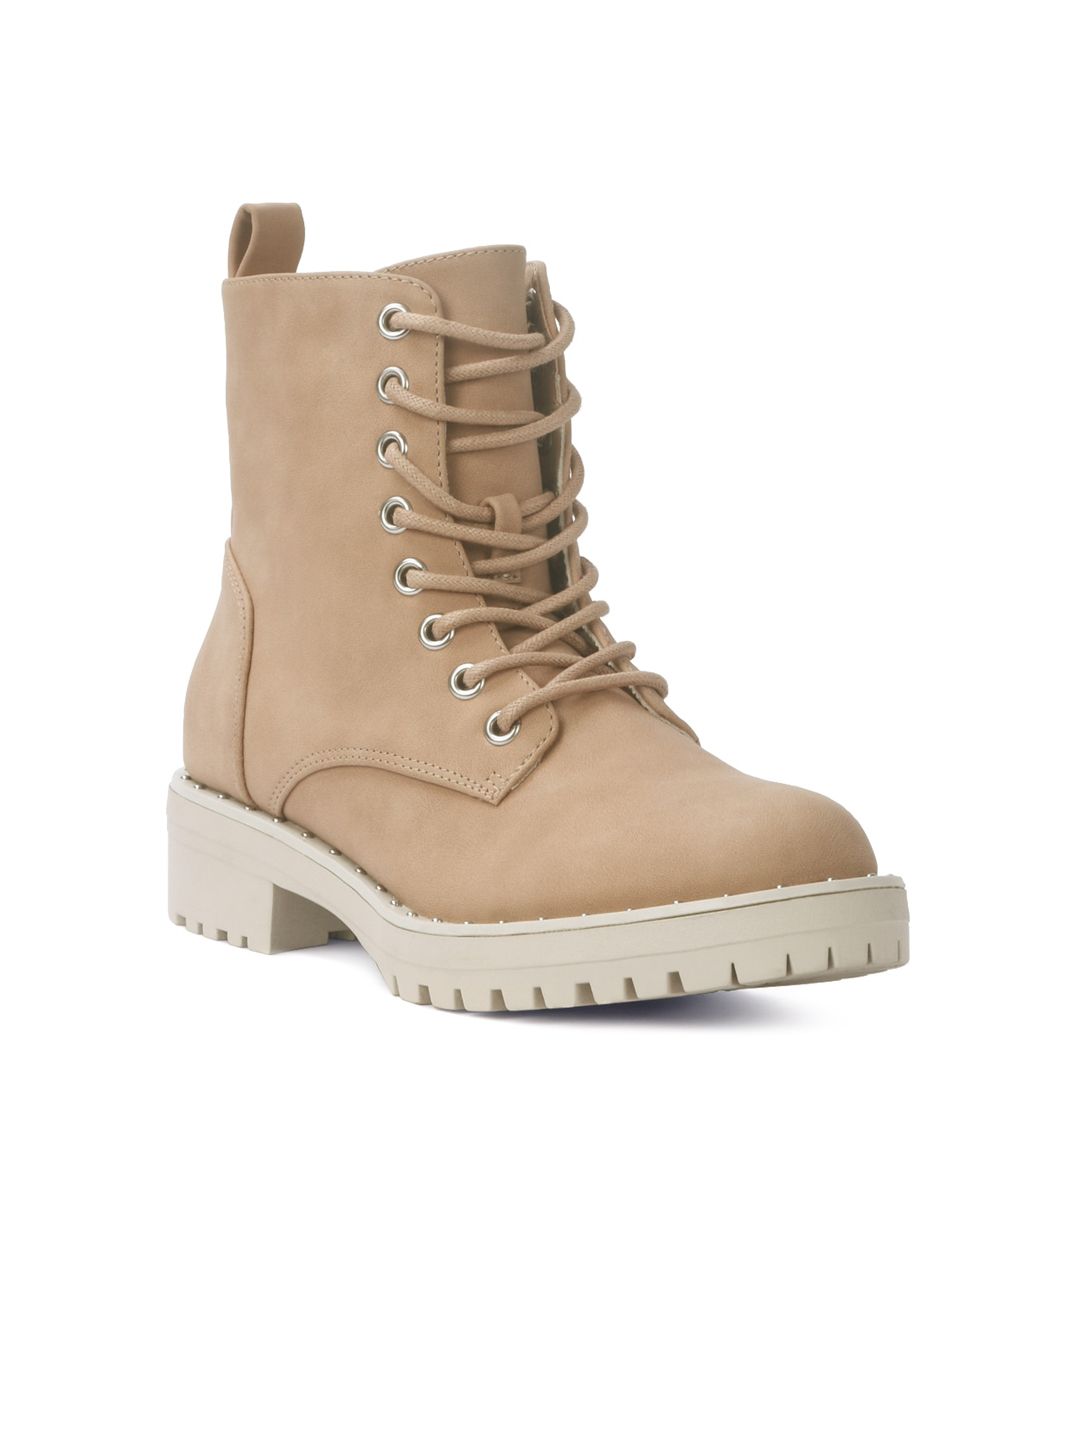 London Rag Women Camel Brown High-Top Stud Lined Biker Block Heeled Boots with Cleats Price in India